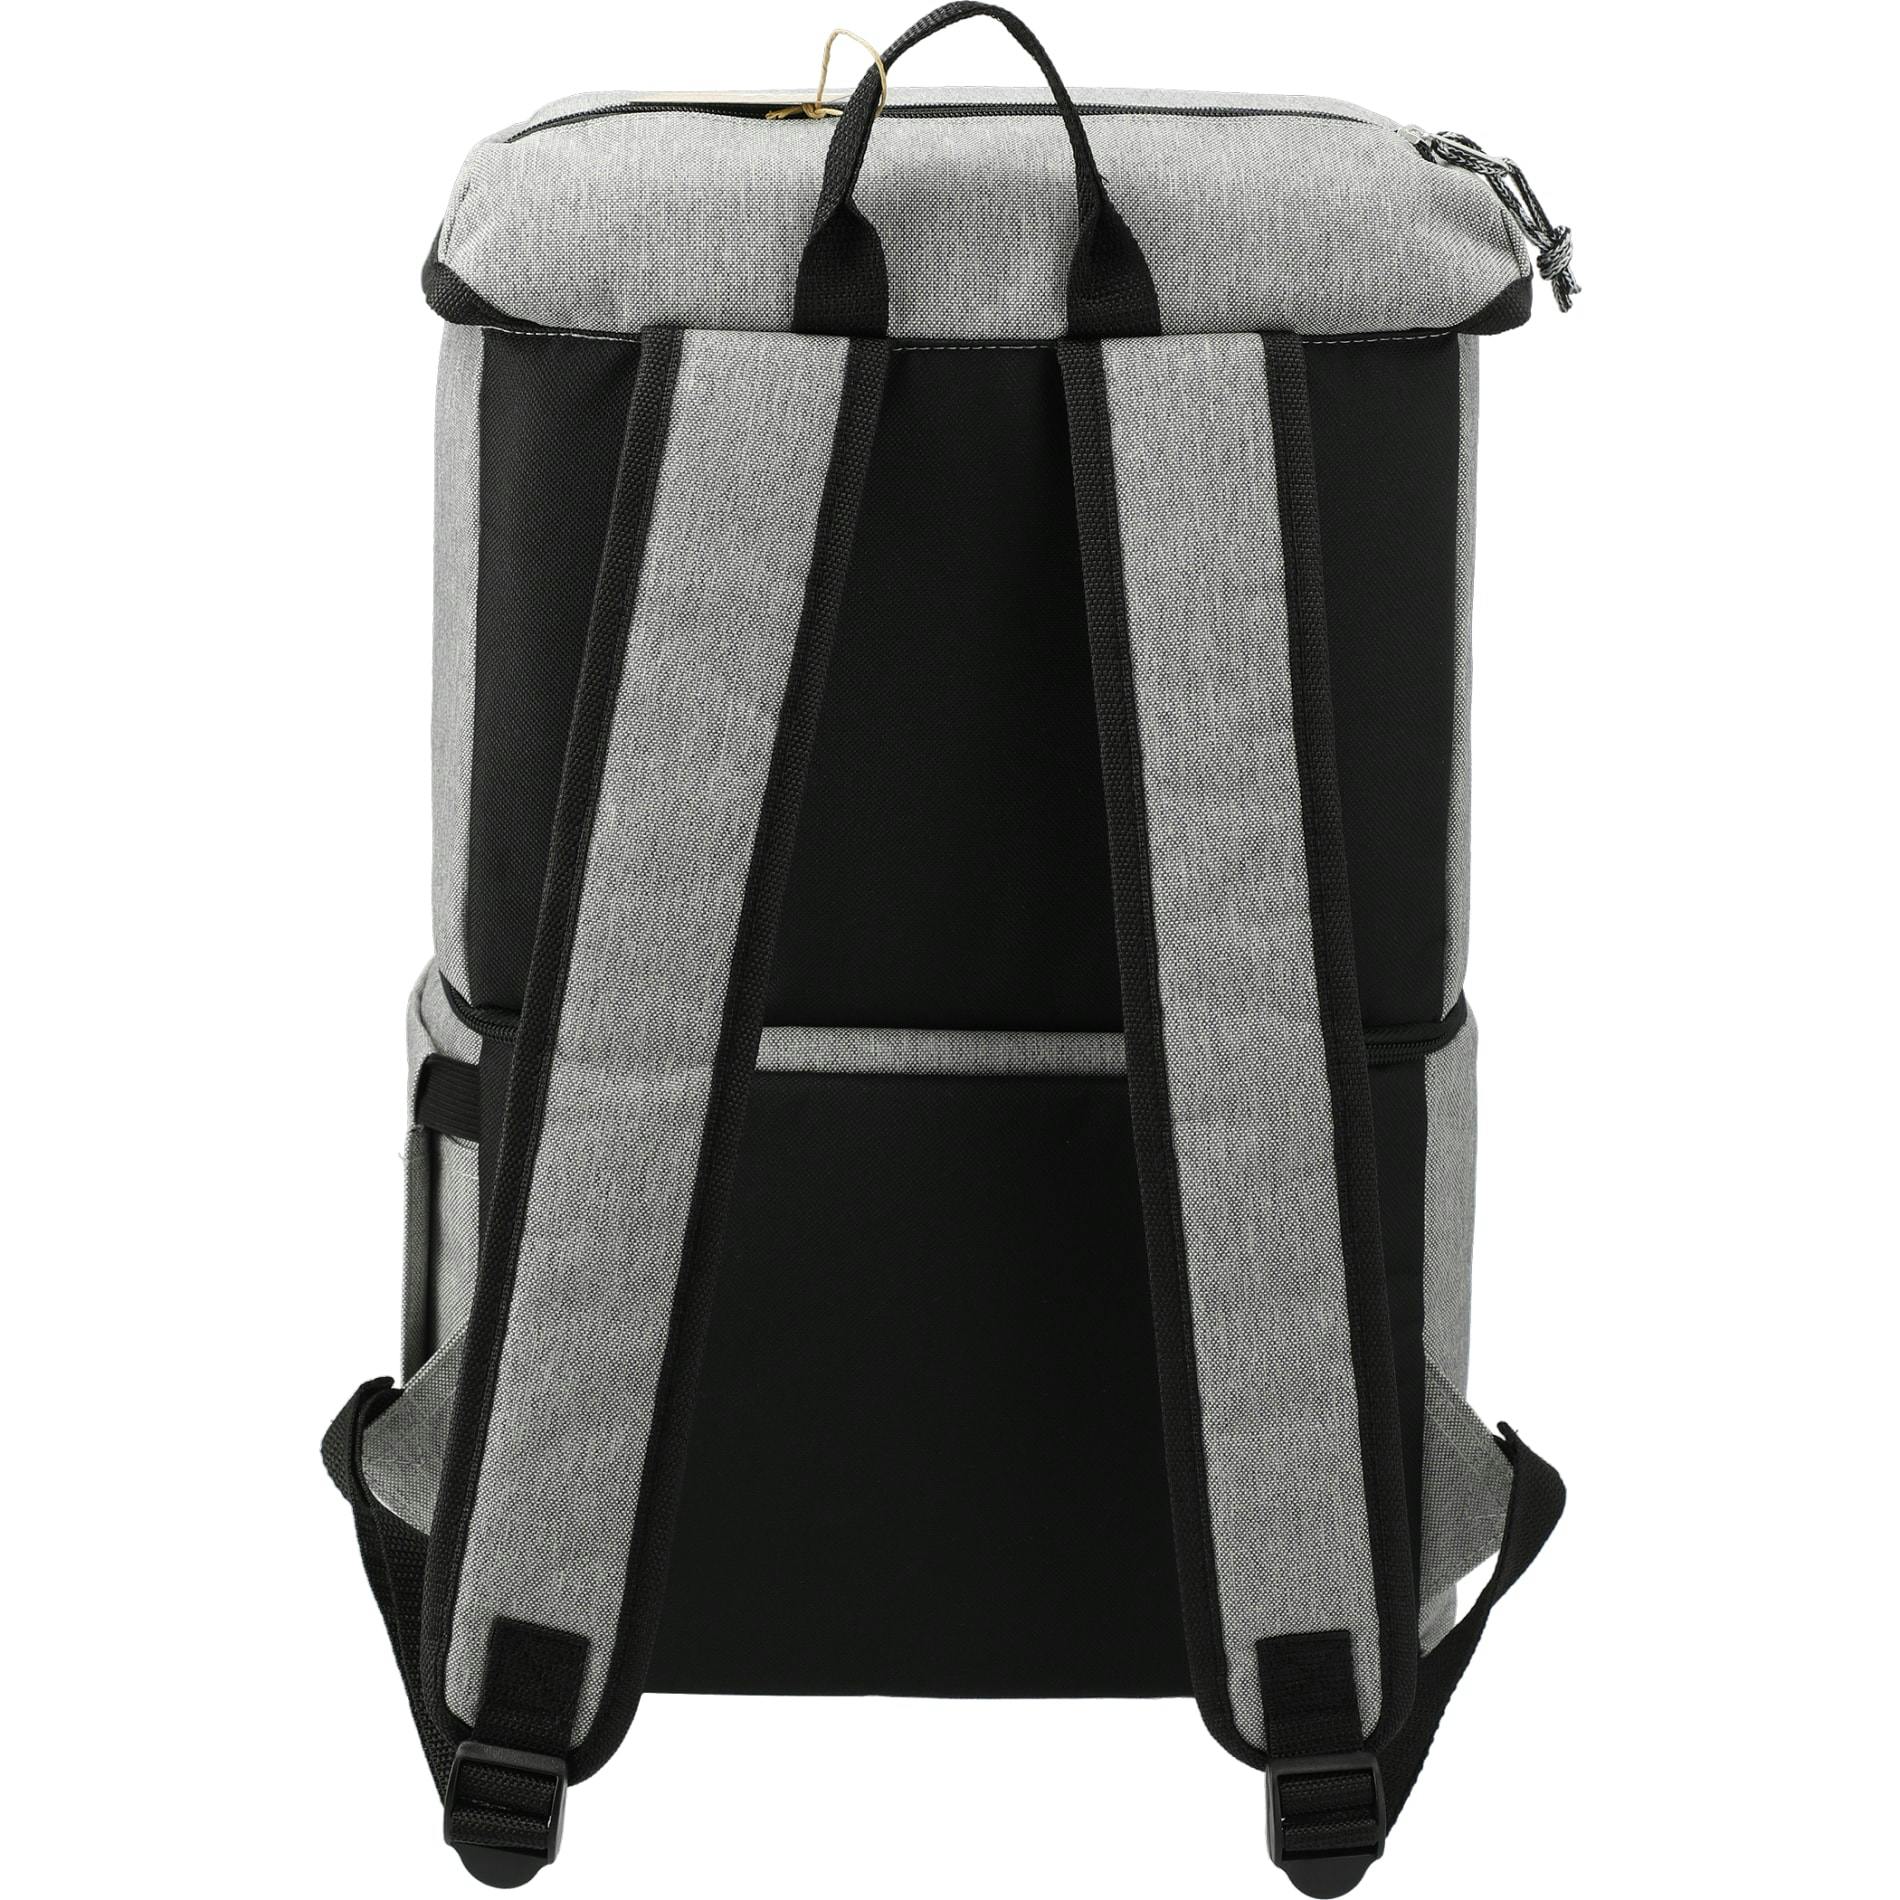 Merchant & Craft Revive Recycled Backpack Cooler - additional Image 1